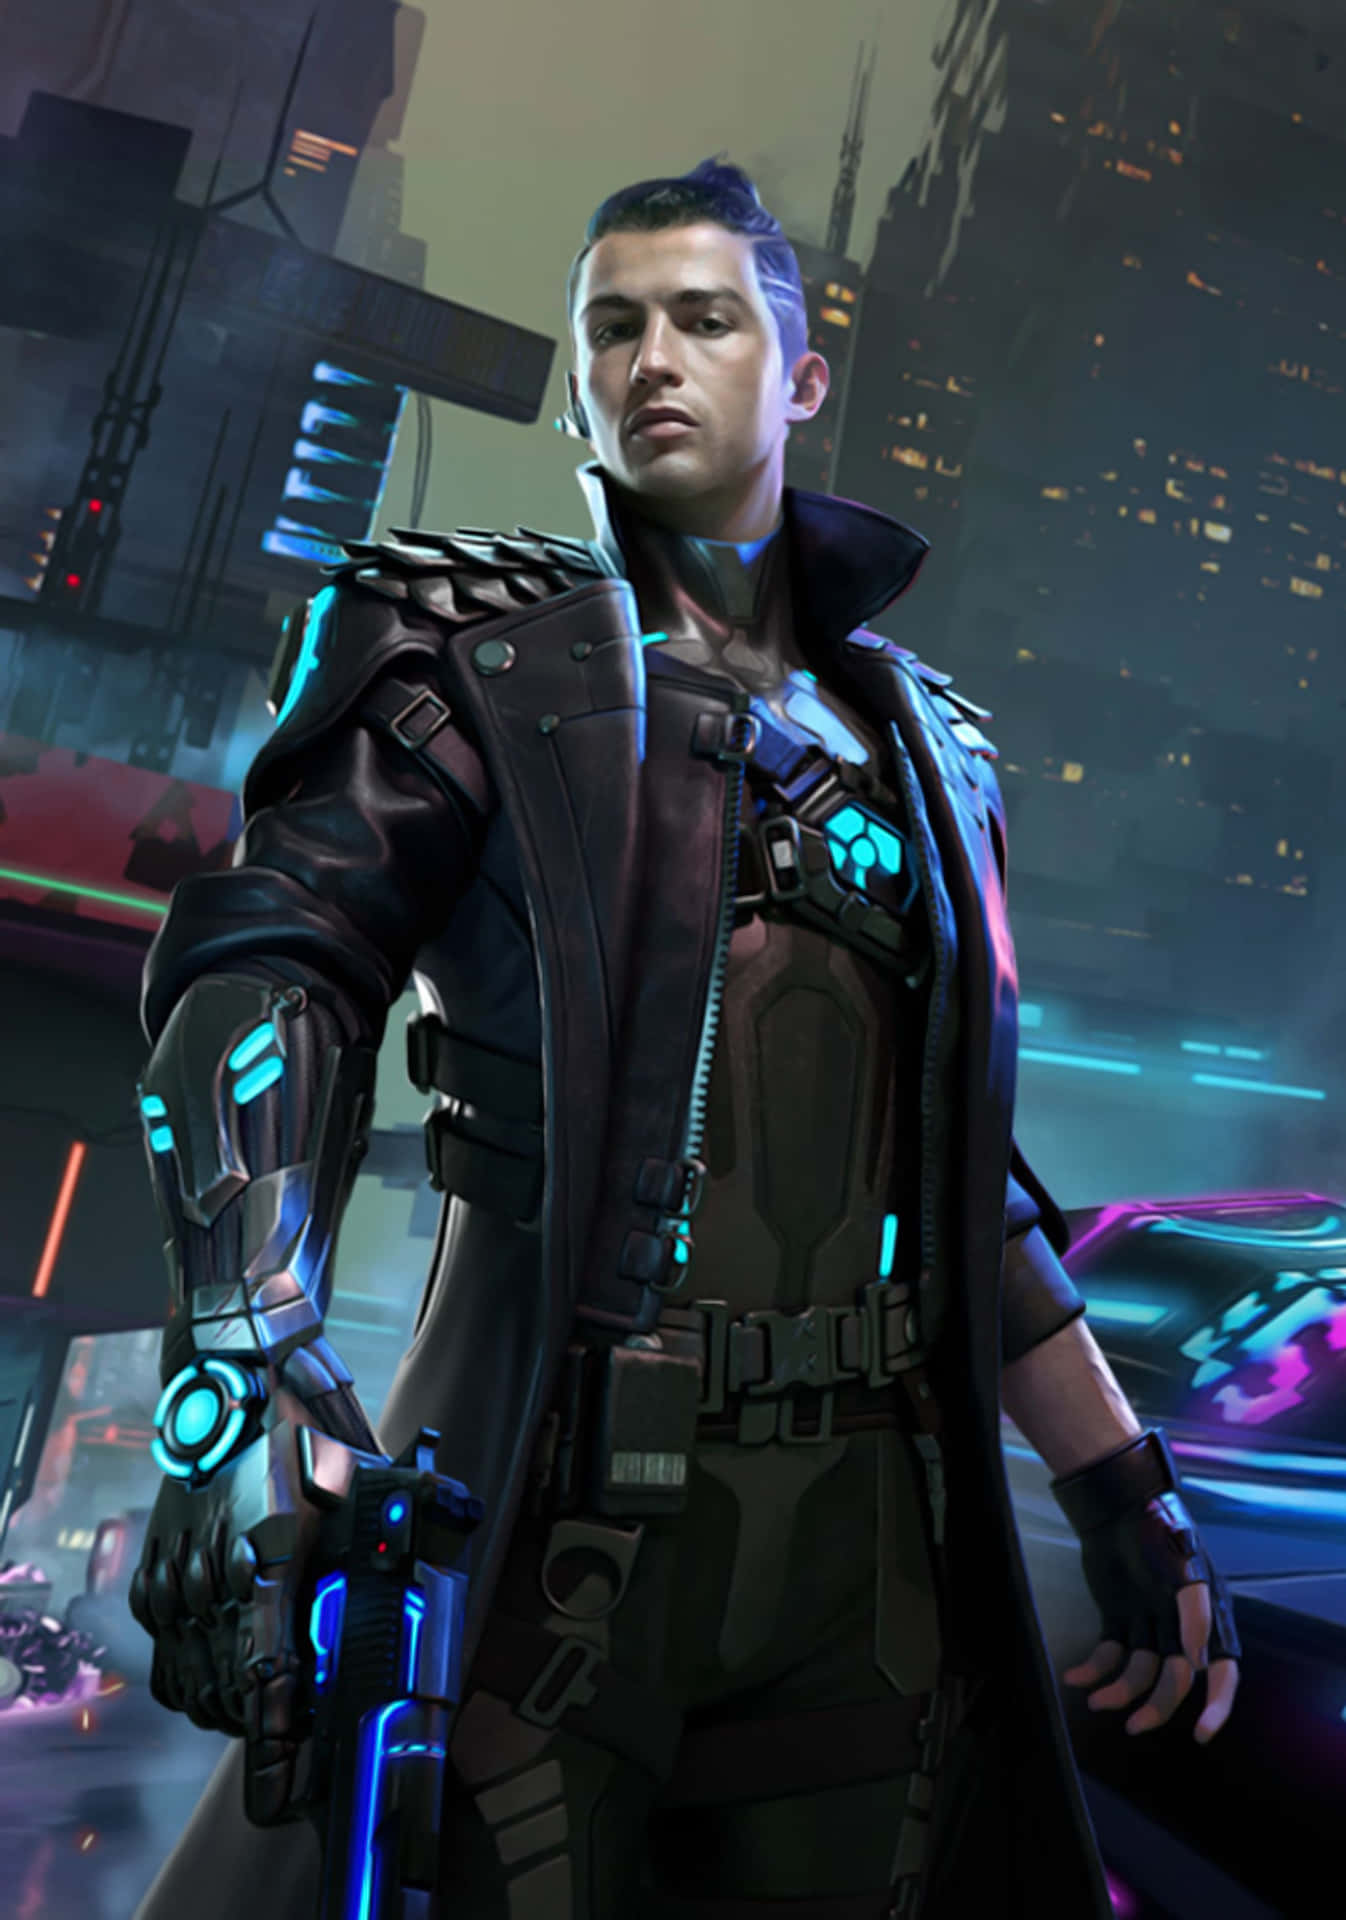 A Man In A Futuristic Outfit Standing In A City Wallpaper